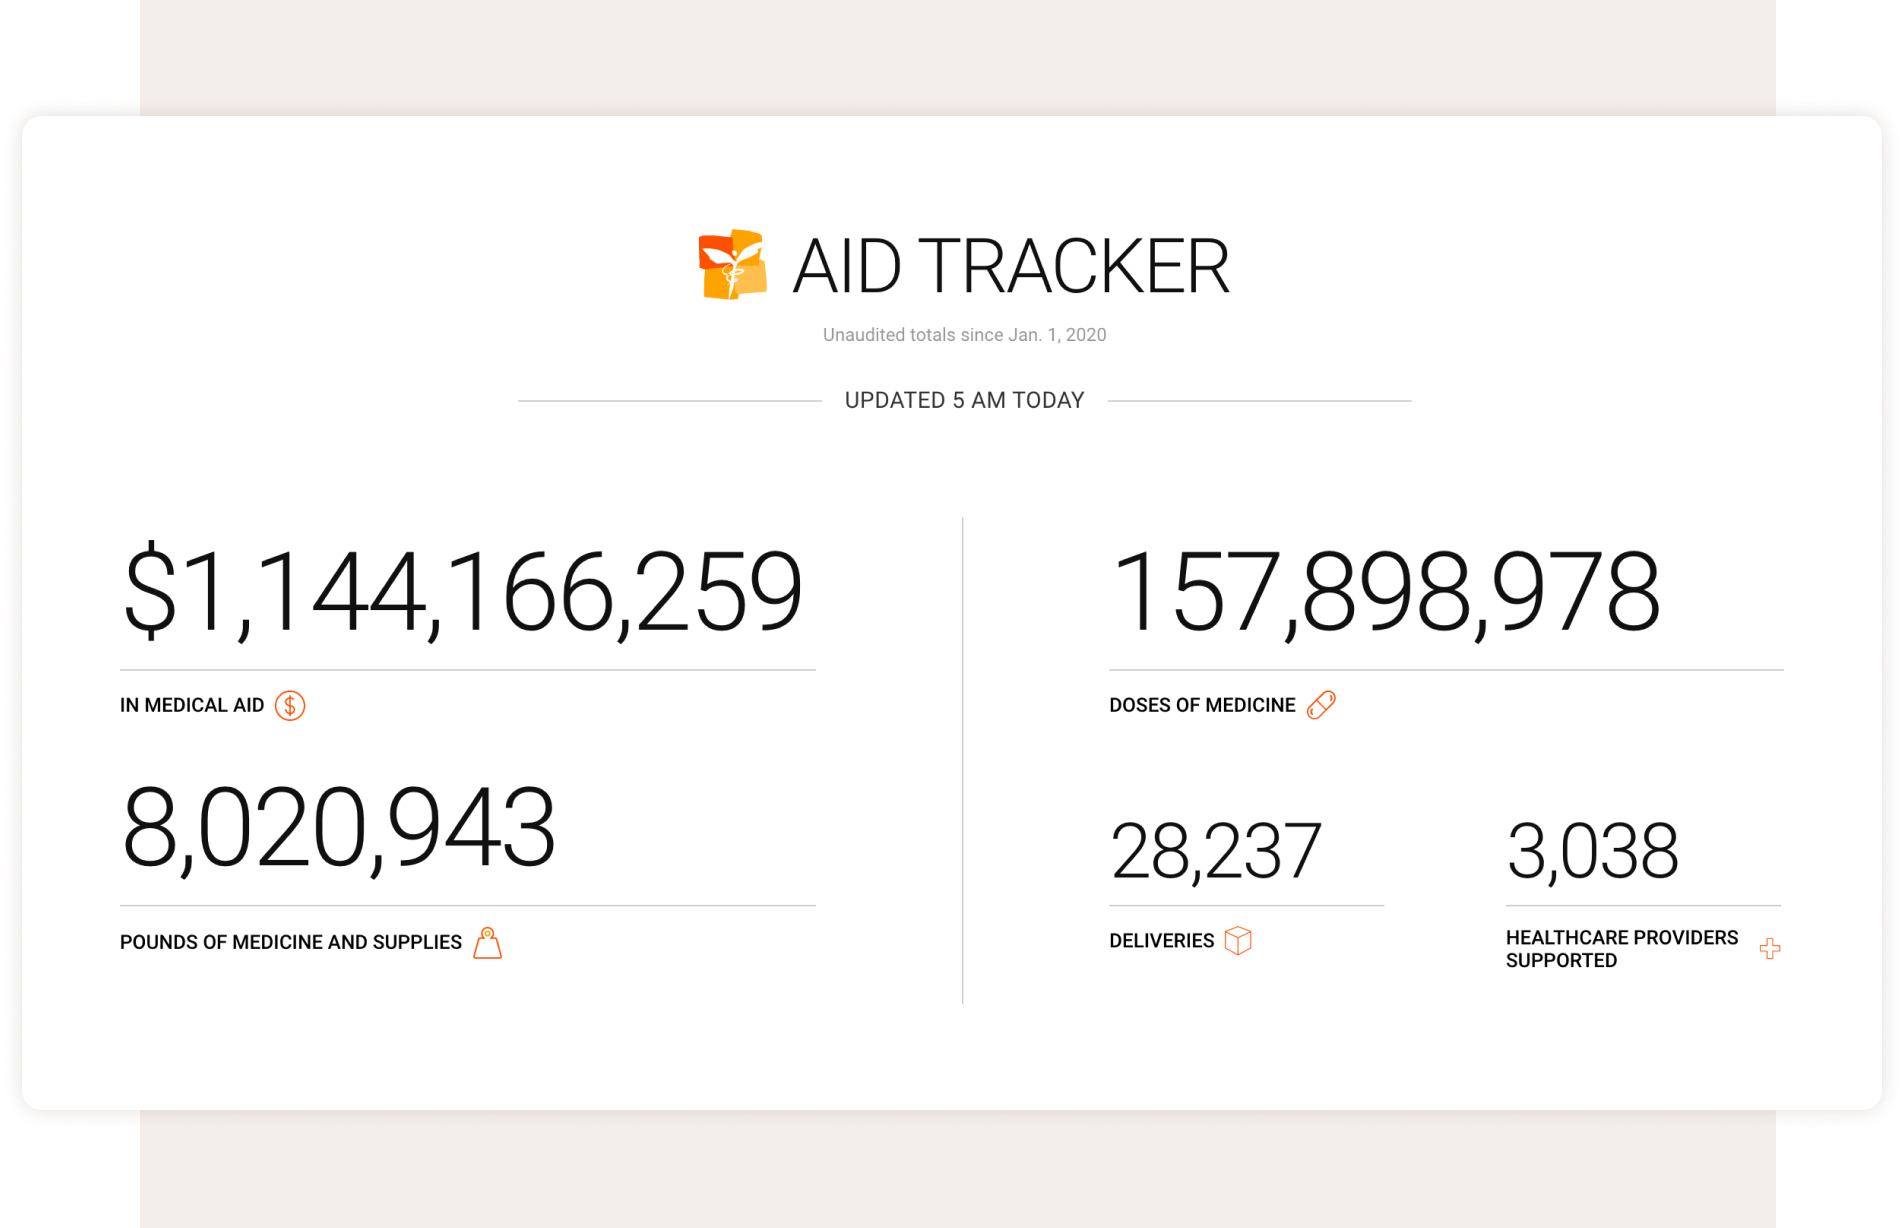 The Direct Relief aid tracker with large bold statistics updated "at 5 am today" - $1,144,166,259 in medical aid, 157,898,978 doses of medicine, 8,020,943 pounds of medicine and supplies, 28,237 deliveries, and 3,038 healthcare providers supported